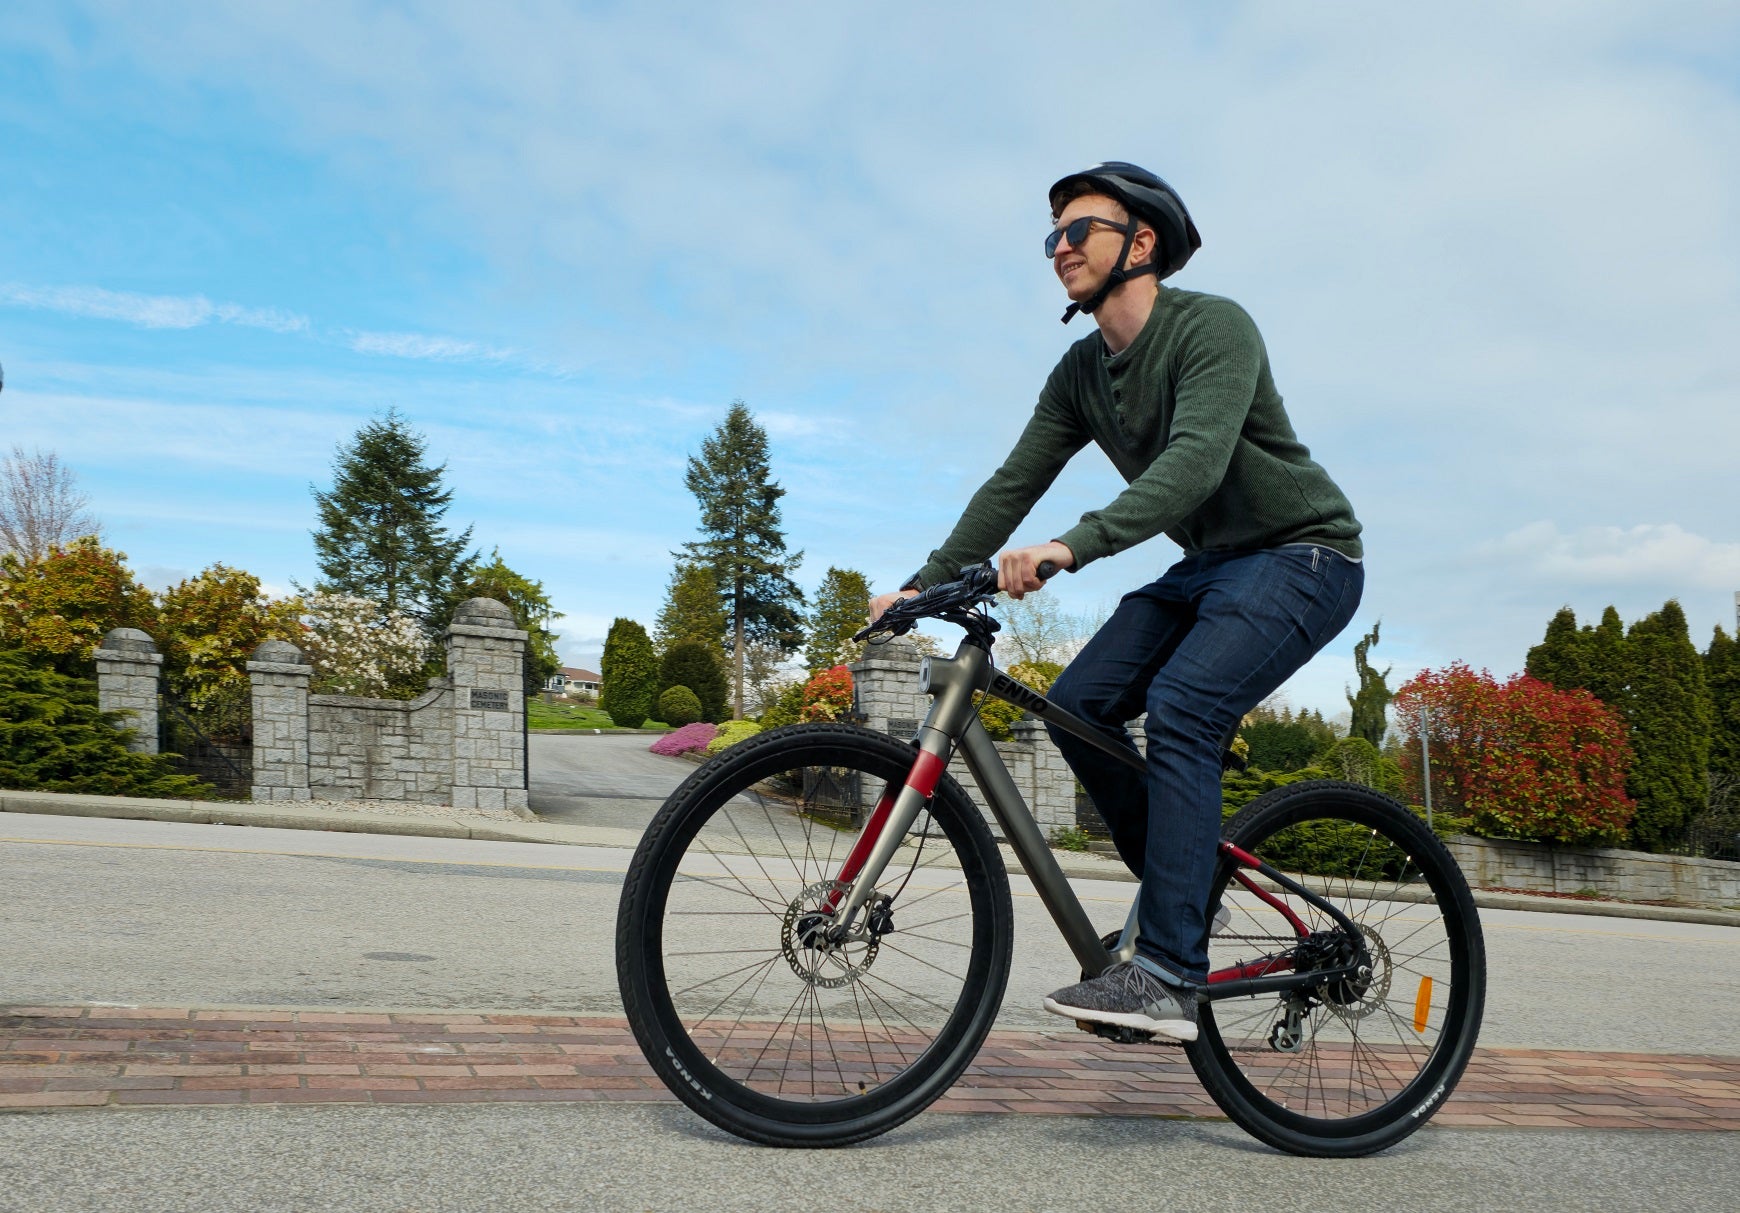 Check out this new electric bike that was ‘designed for millennials and zoomers’